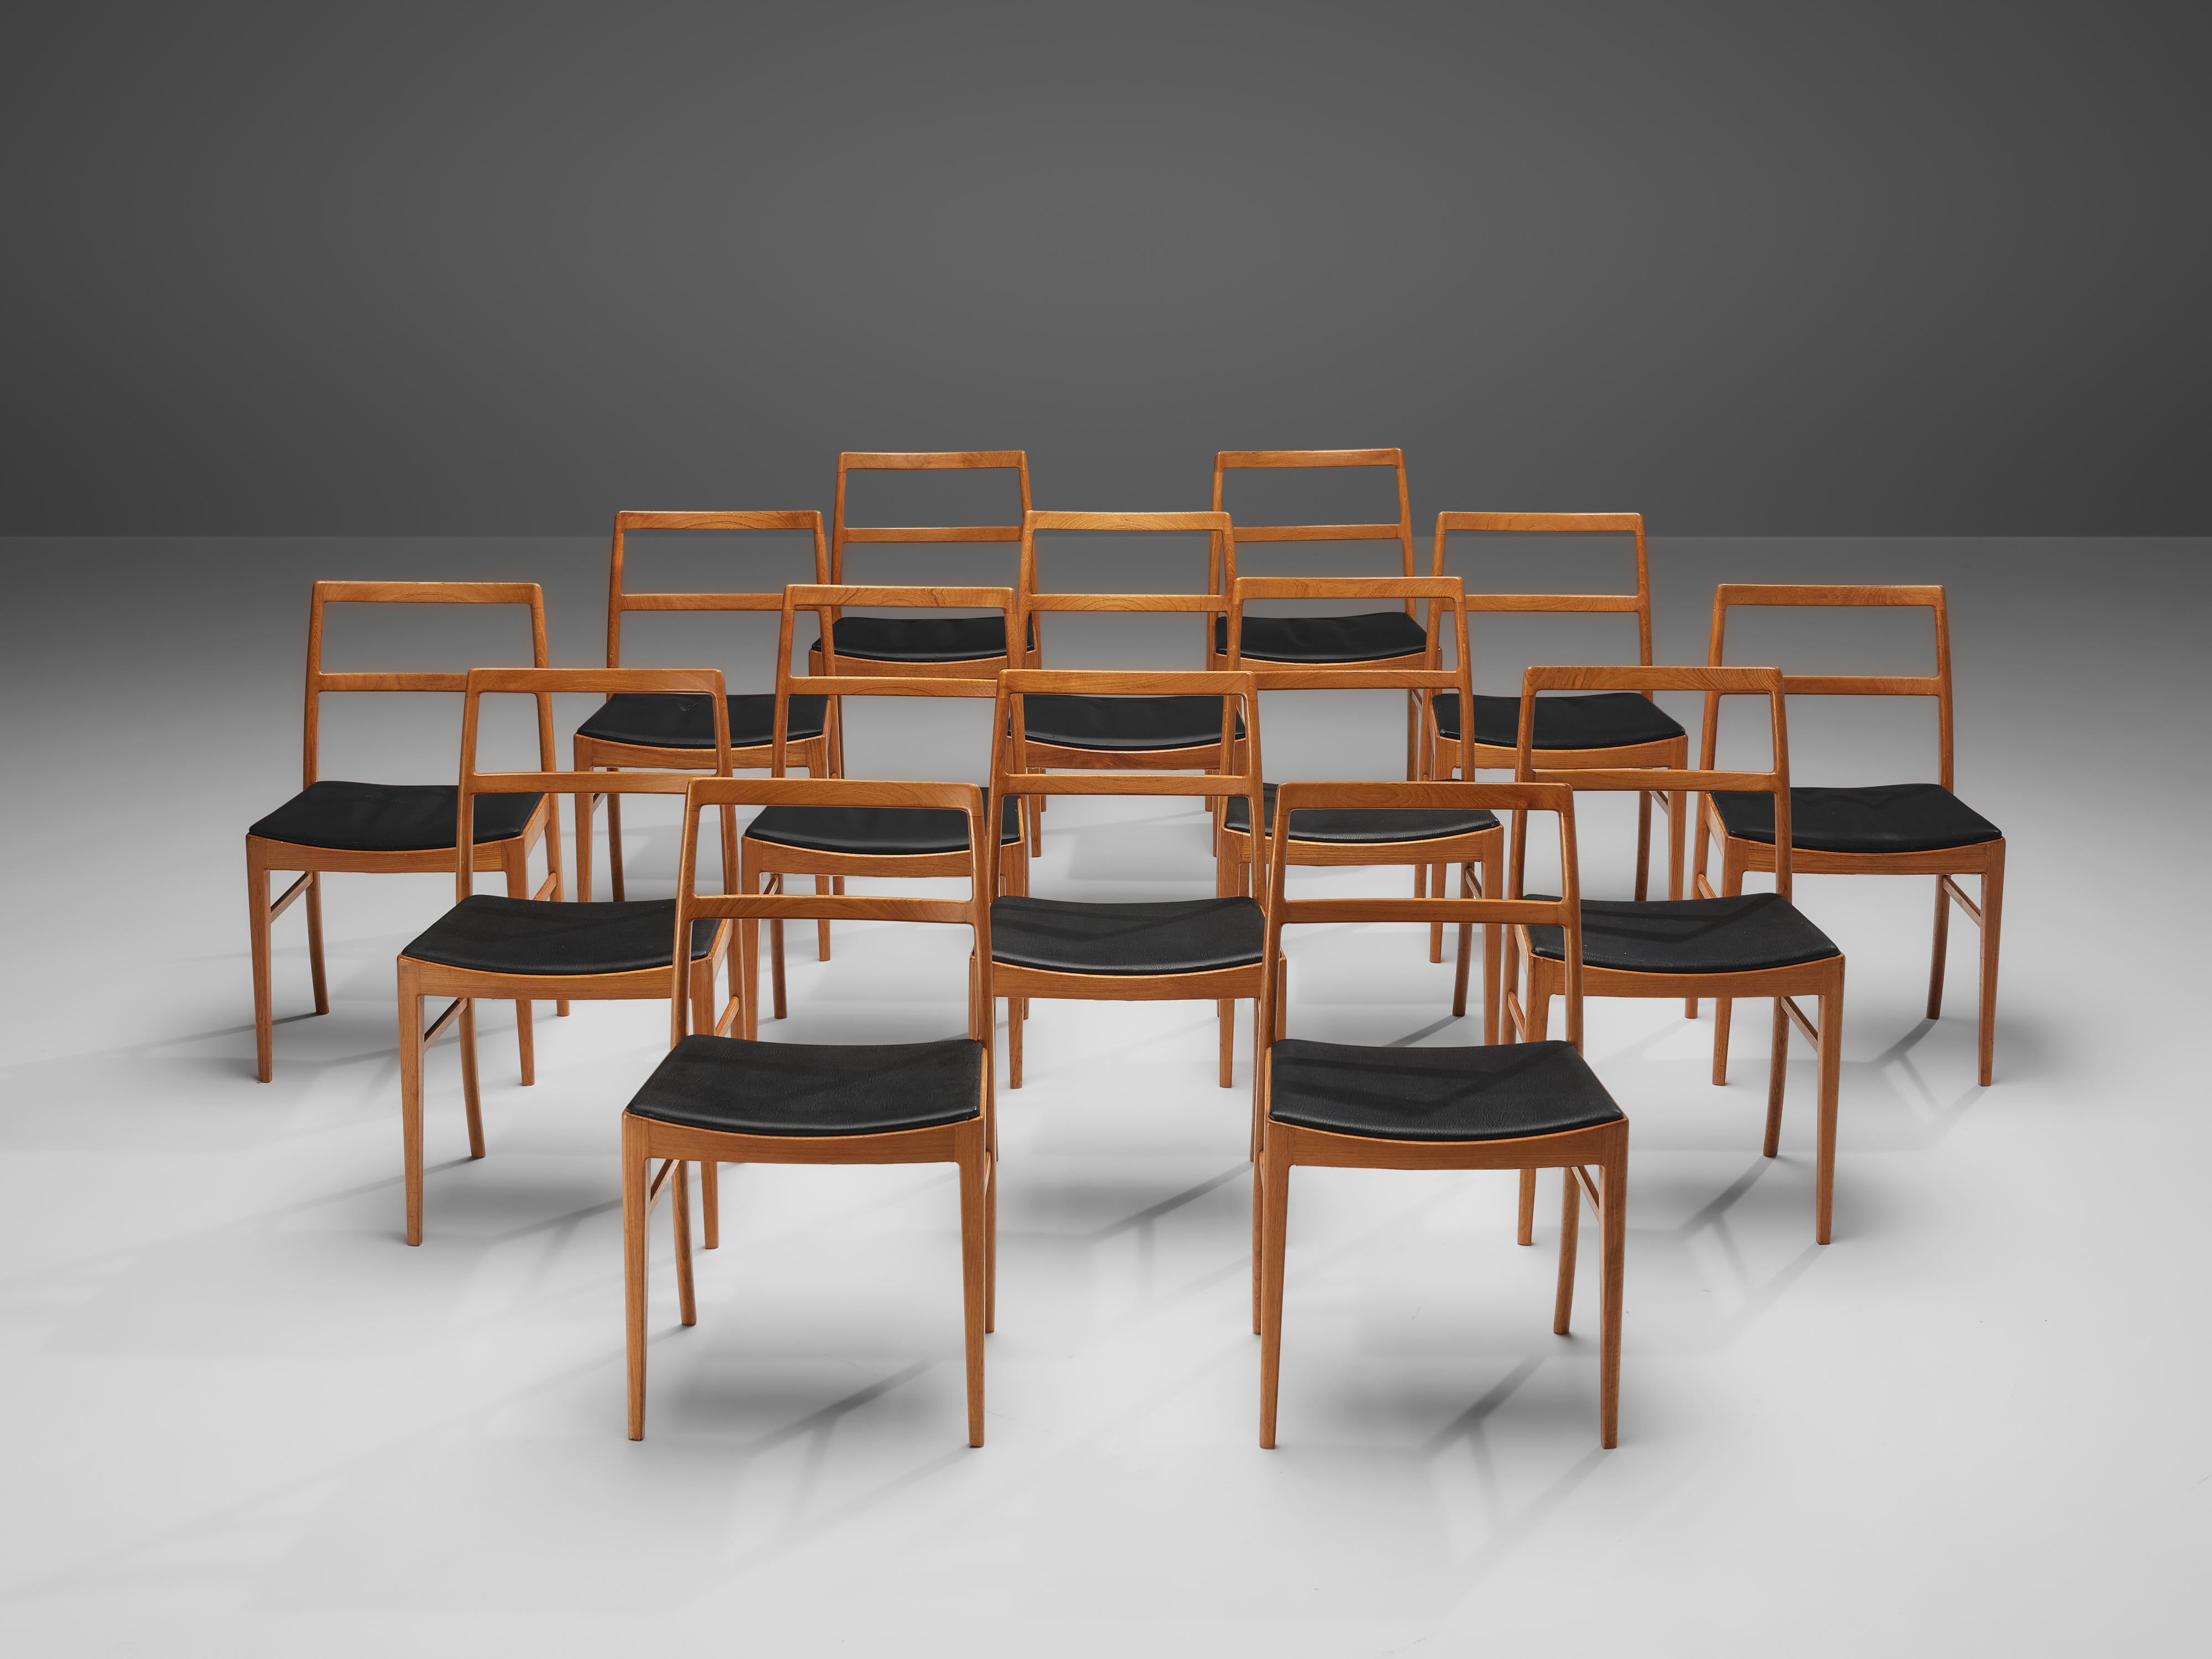 Arne Vodder for Sibast Møbler, set of fourteen dining chairs model 430, teak, leather, Denmark, 1960s. 

The basic and linear design gives these chairs a feel of lightness. The wood joints and rounded edges show great craftsmanship and attention to